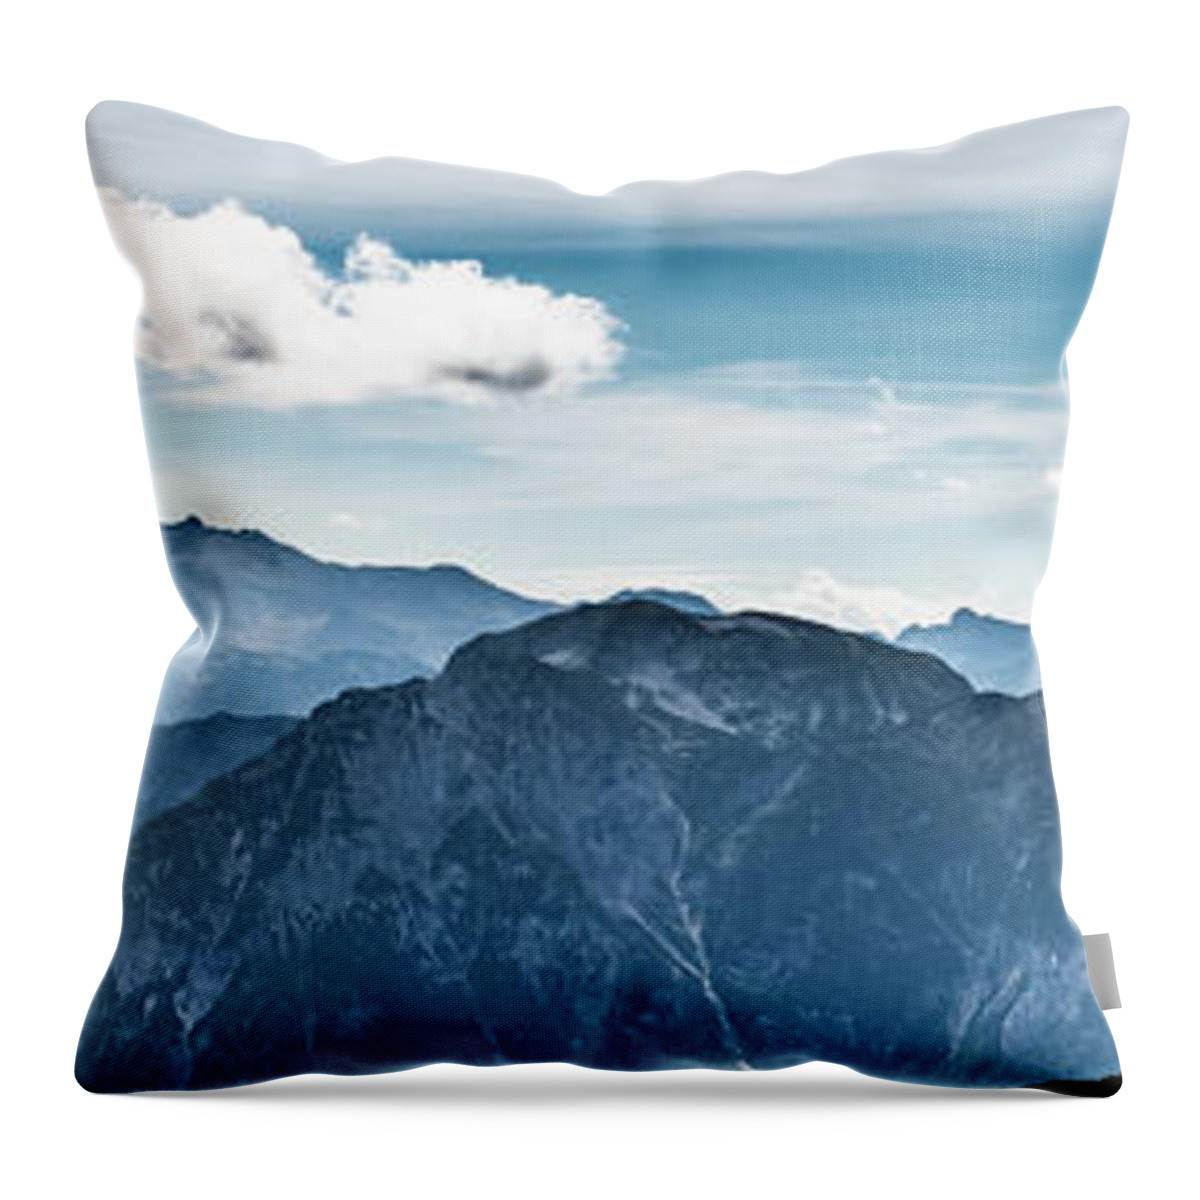 Austria Throw Pillow featuring the photograph Spectacular Mountain Dachstein With Glacier In The Alps Of Austria by Andreas Berthold